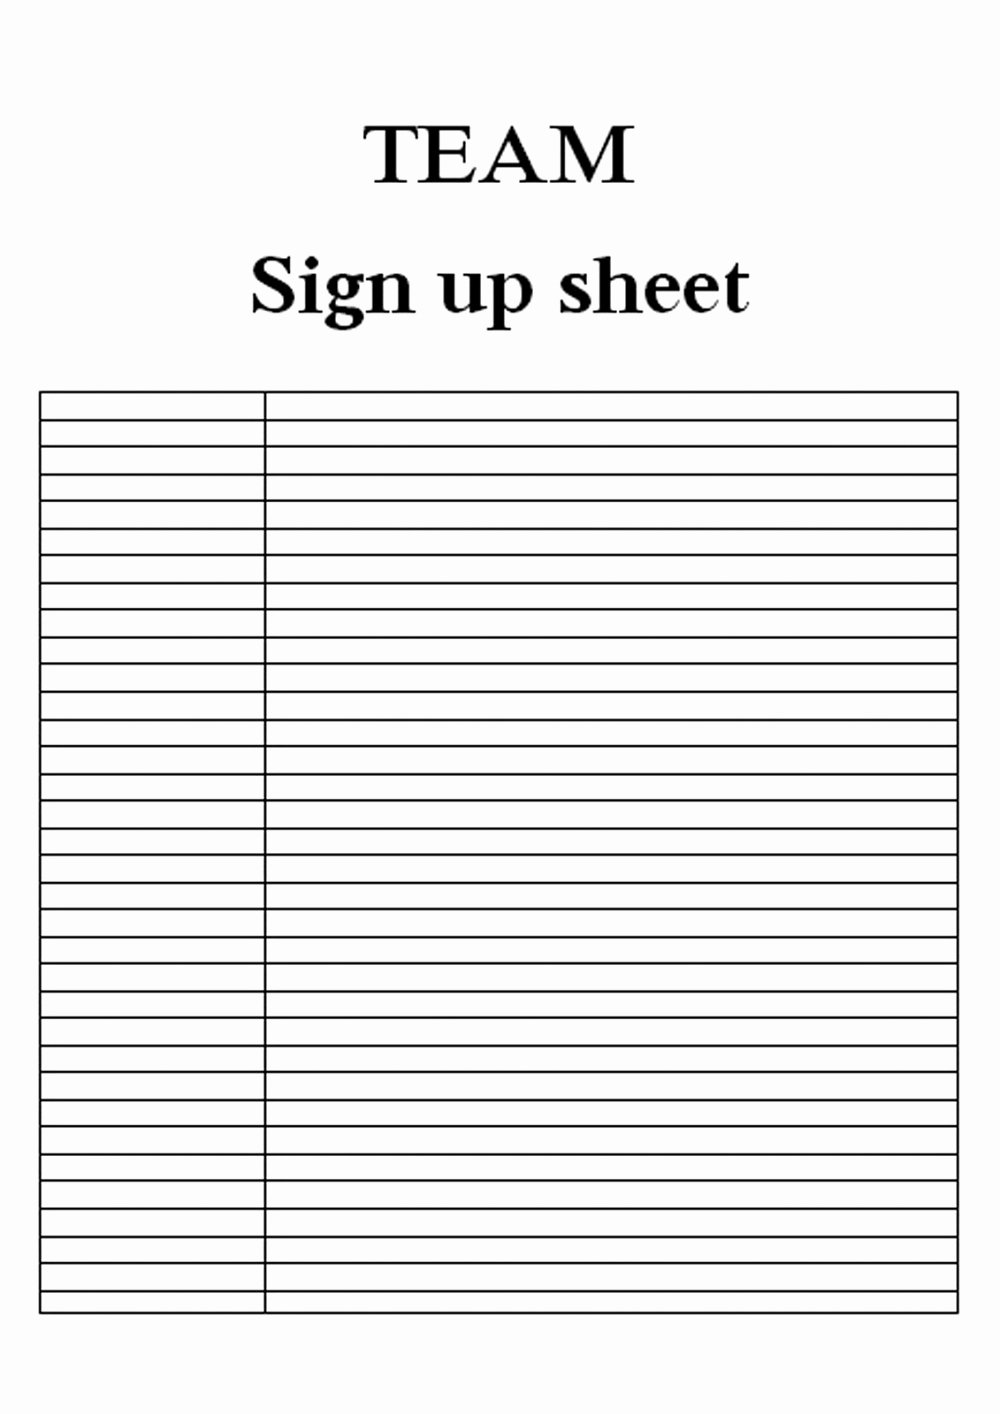 Sign Up form Template Word Fresh Blank Sign Up Sheet Printable